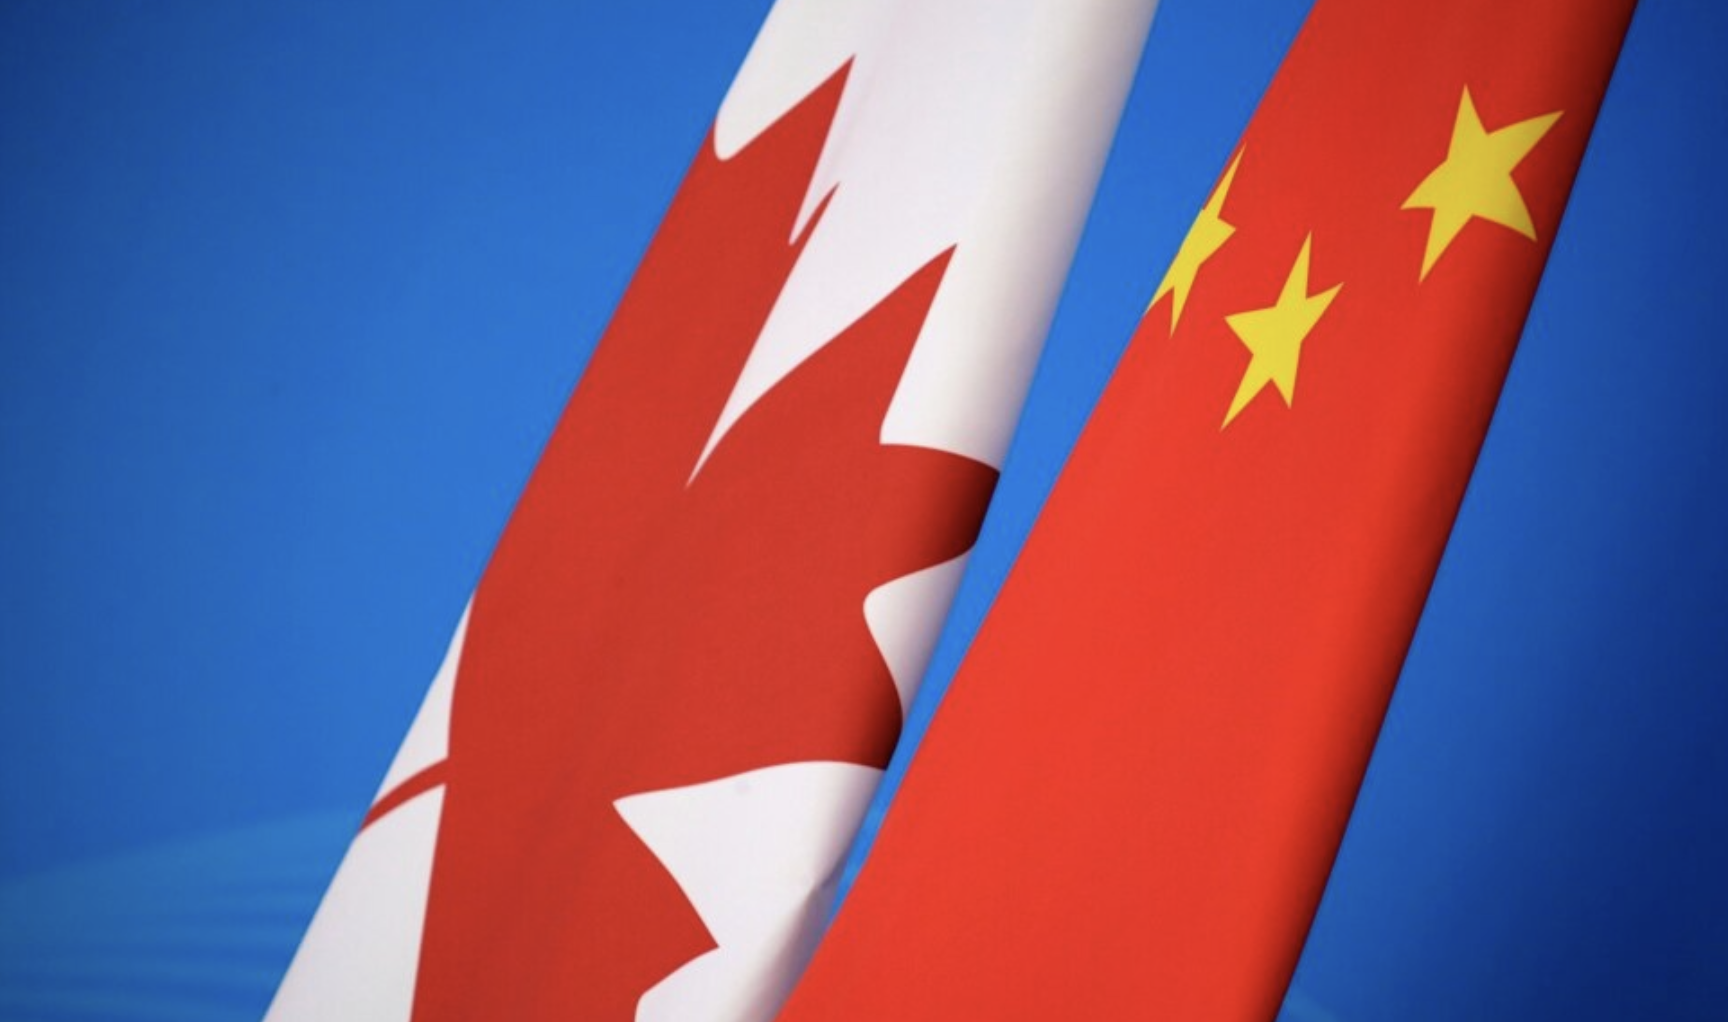 Flags of Canada and China are placed for the first China-Canada economic and financial strategy dialogue in Beijing, Nov. 12, 2018.